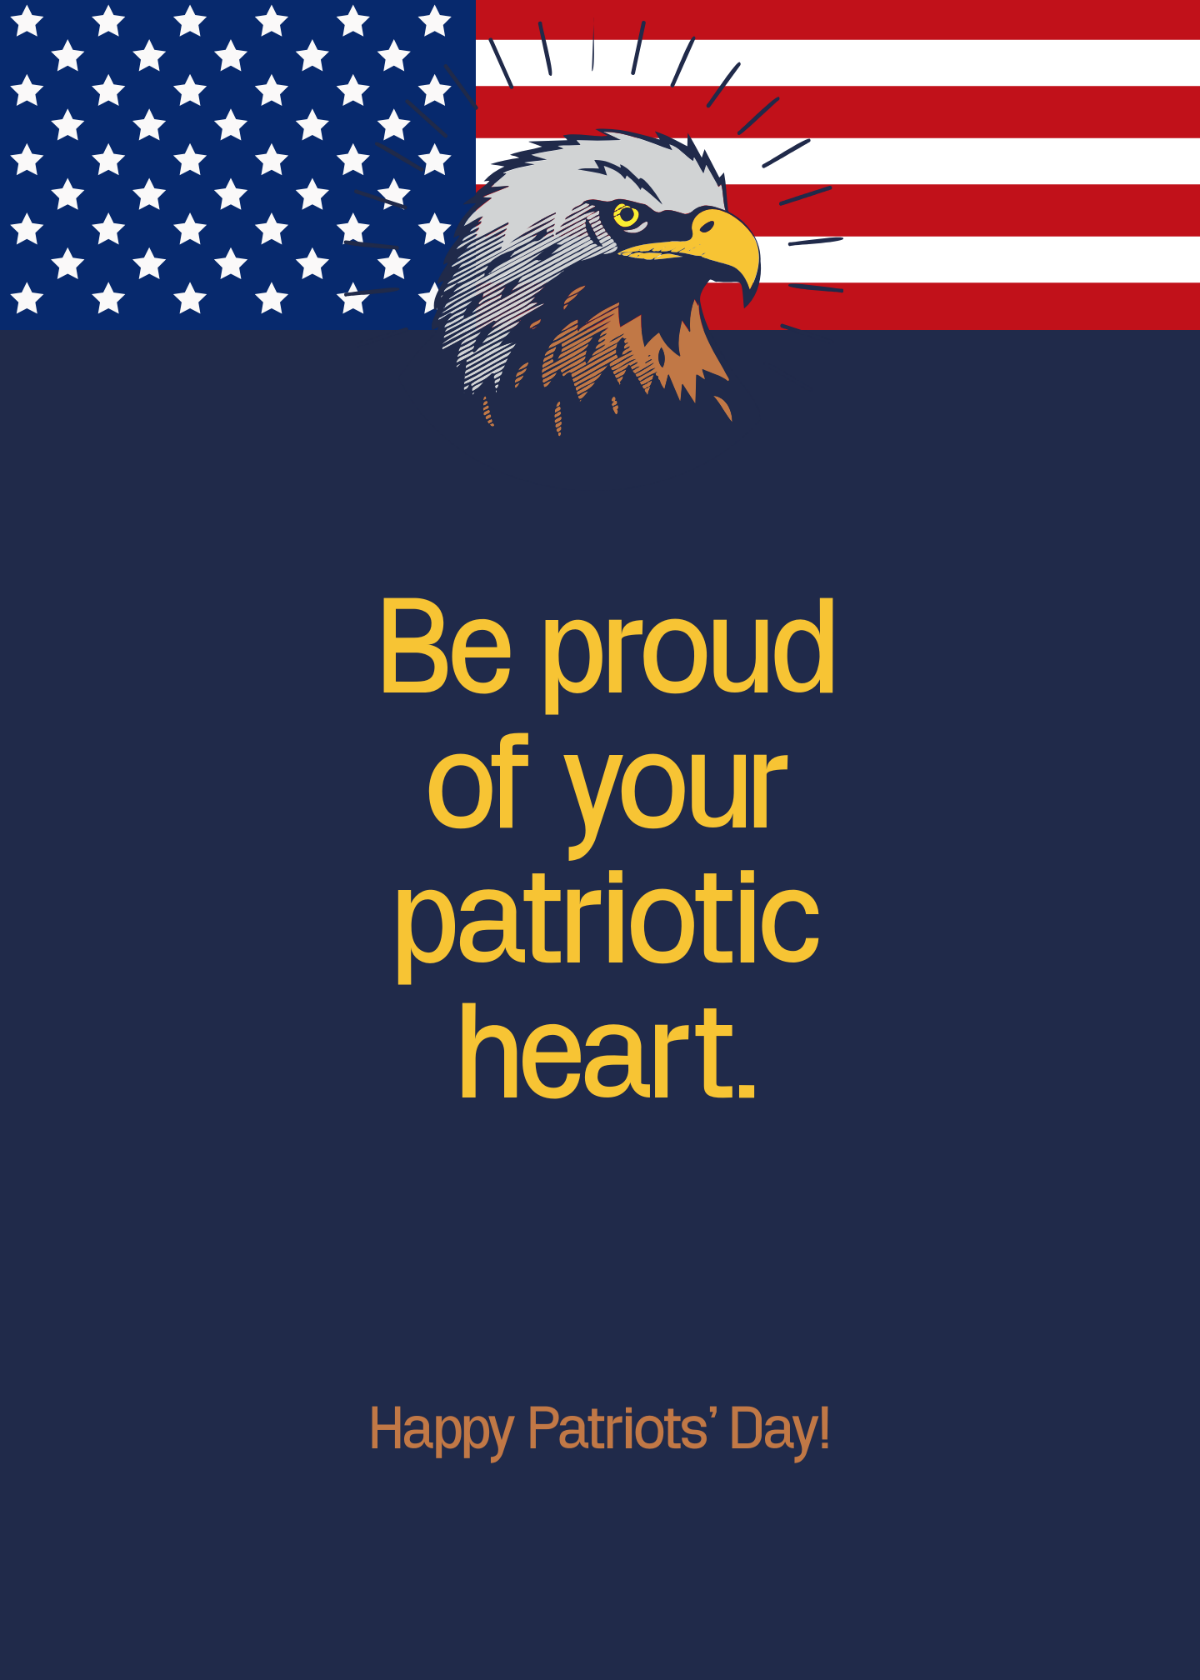 Happy Patriots' Day Greeting Card Template